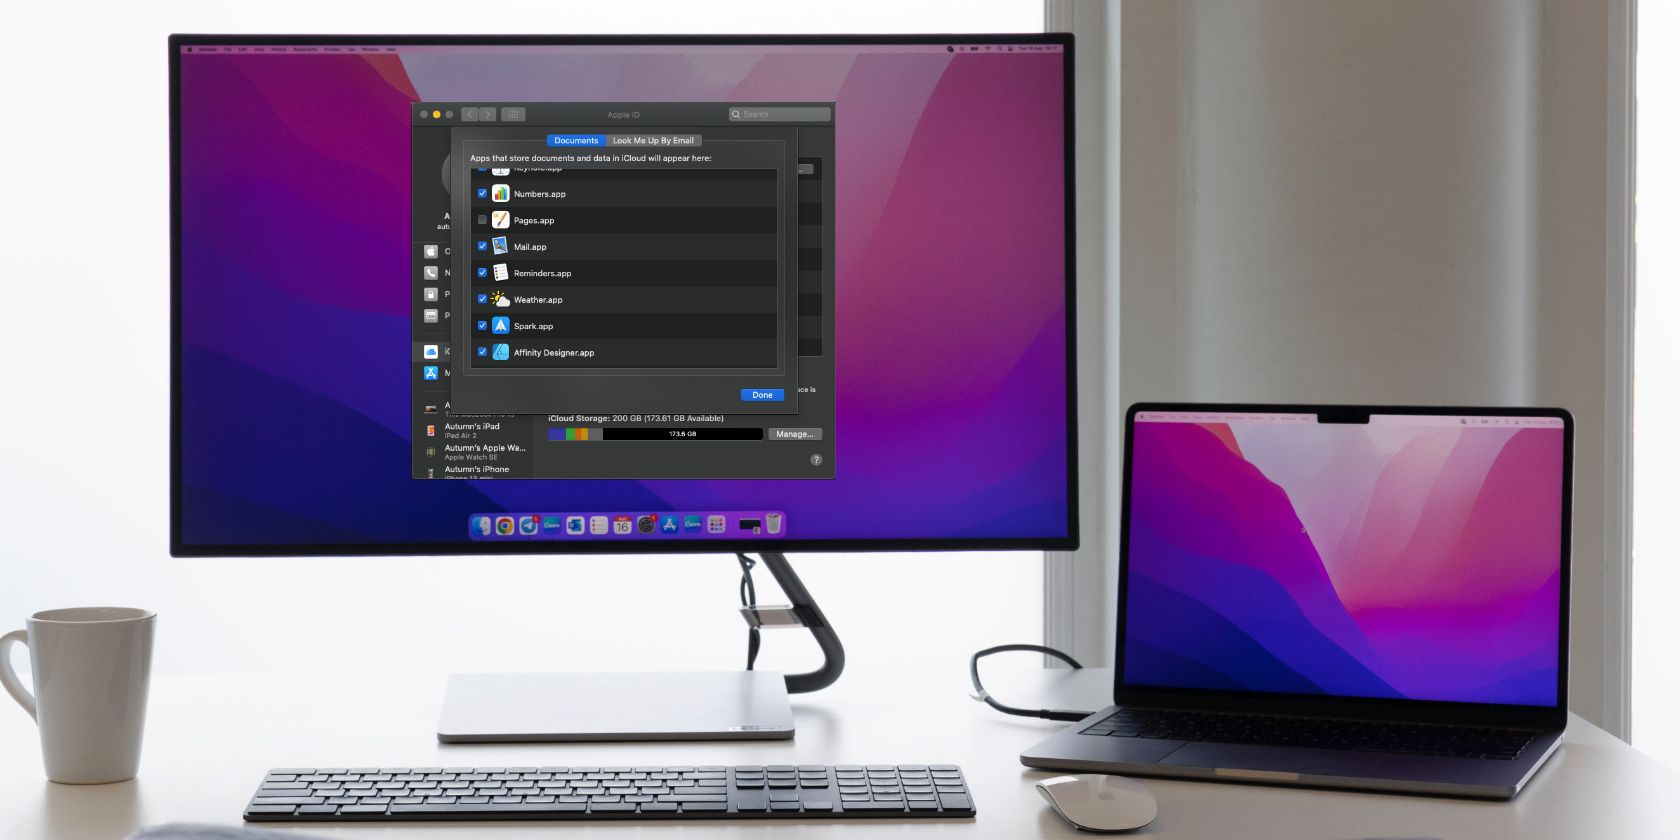 Mac computer and monitor on a desk with settings menu open